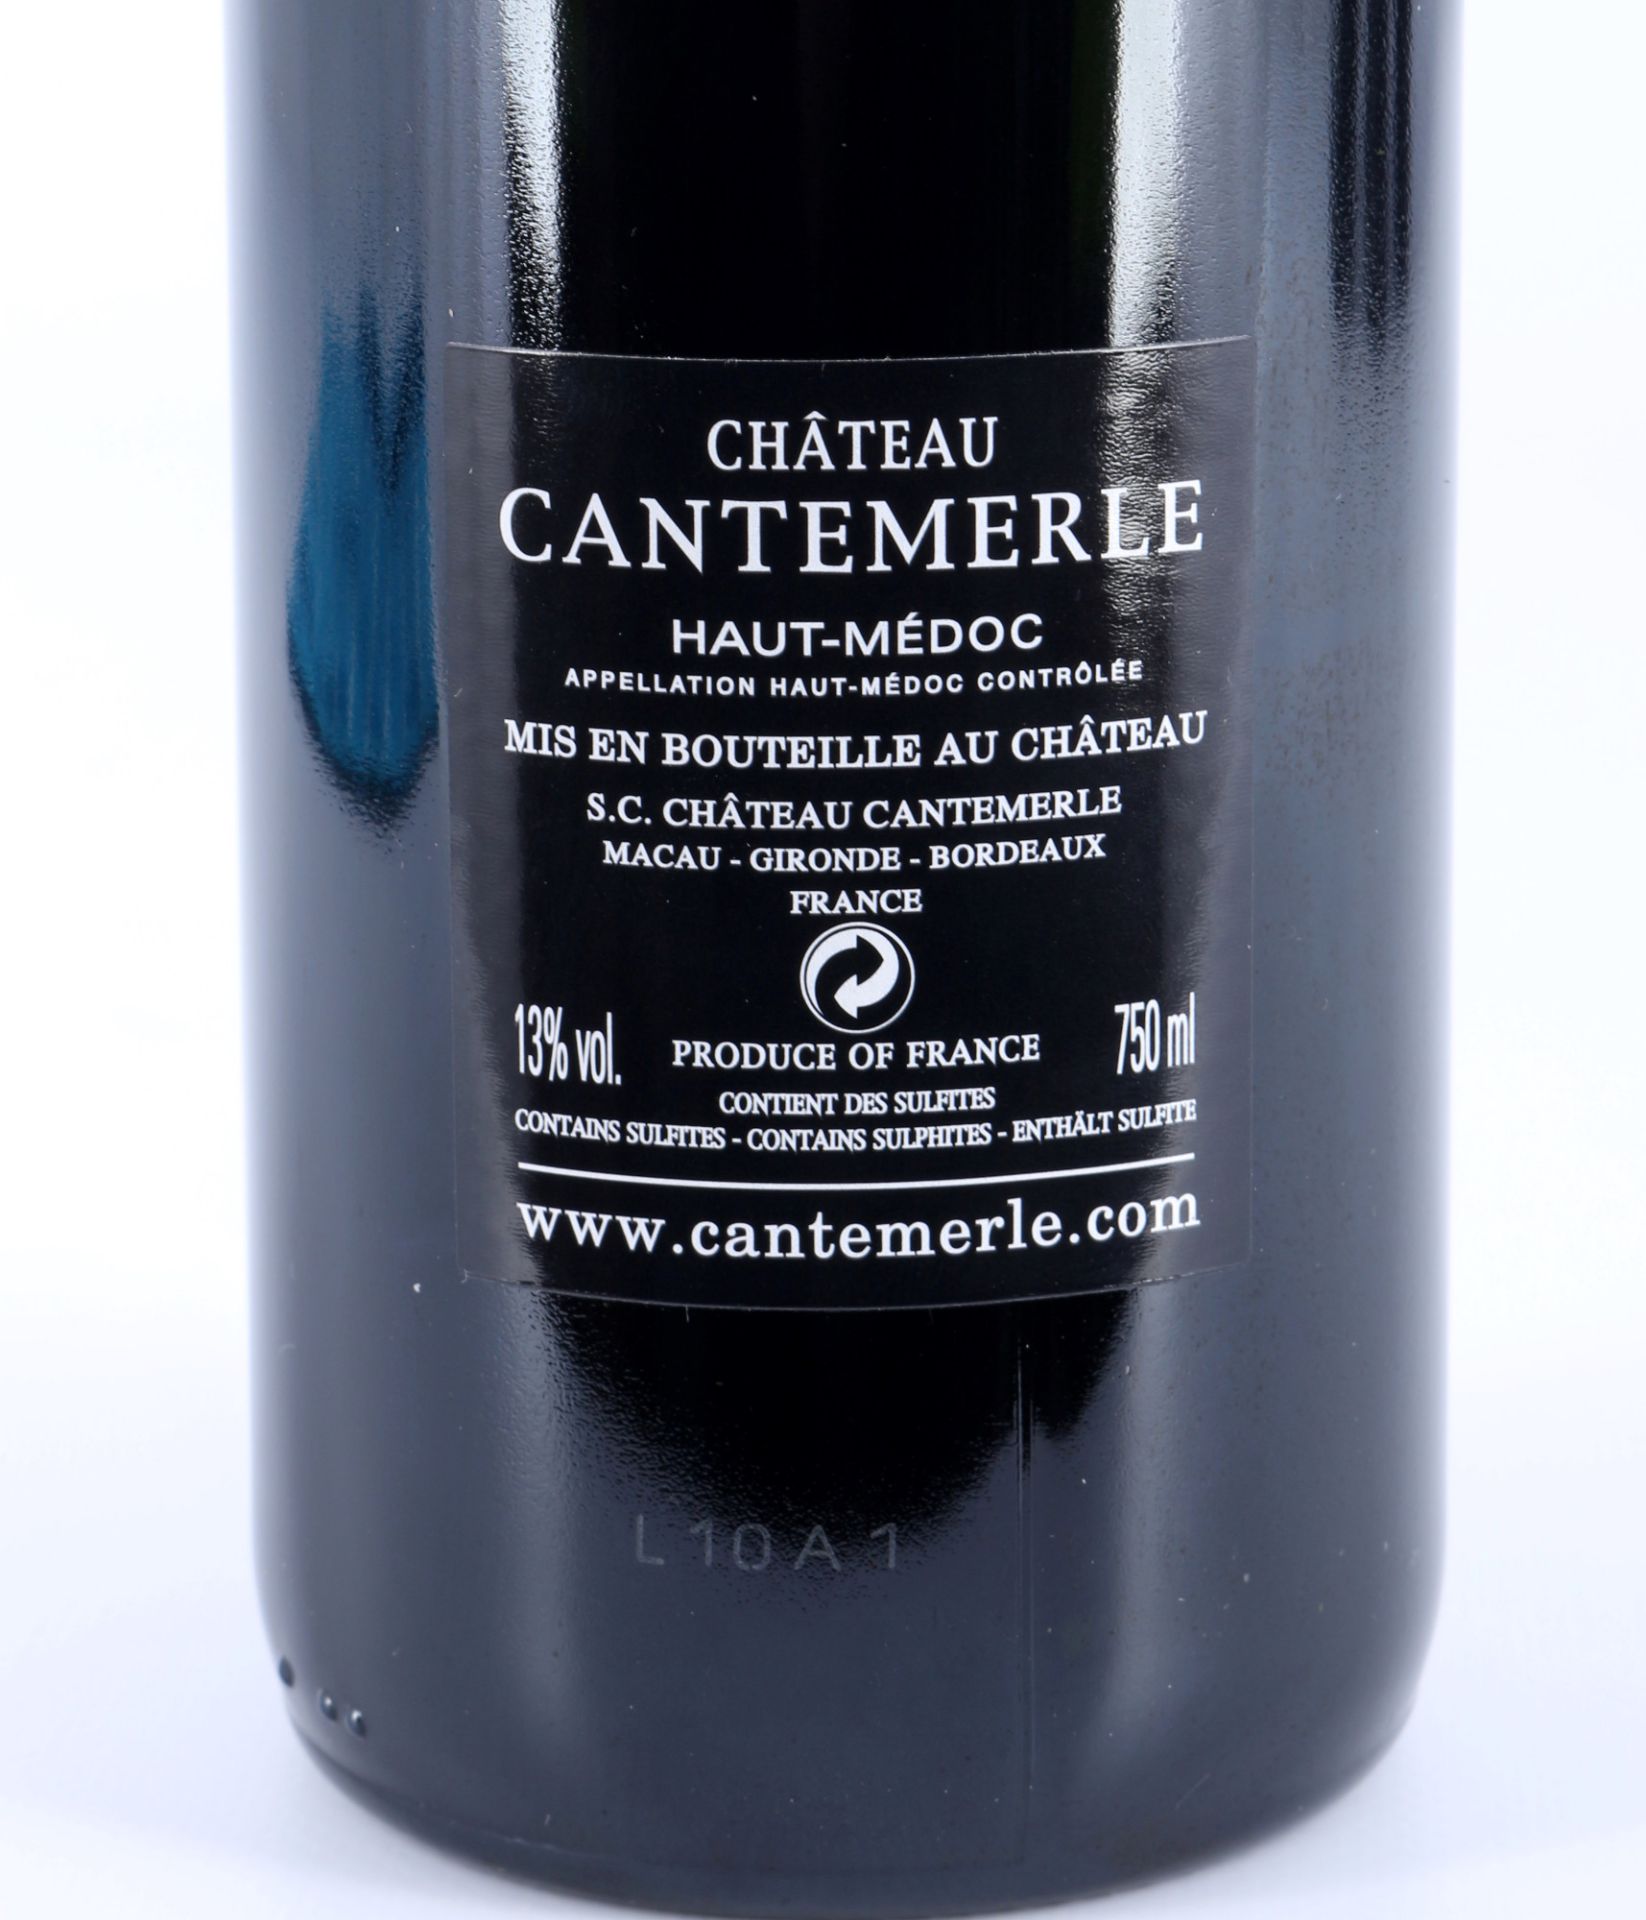 2010 Chateau Cantemerle 6 bottles, - Image 5 of 6